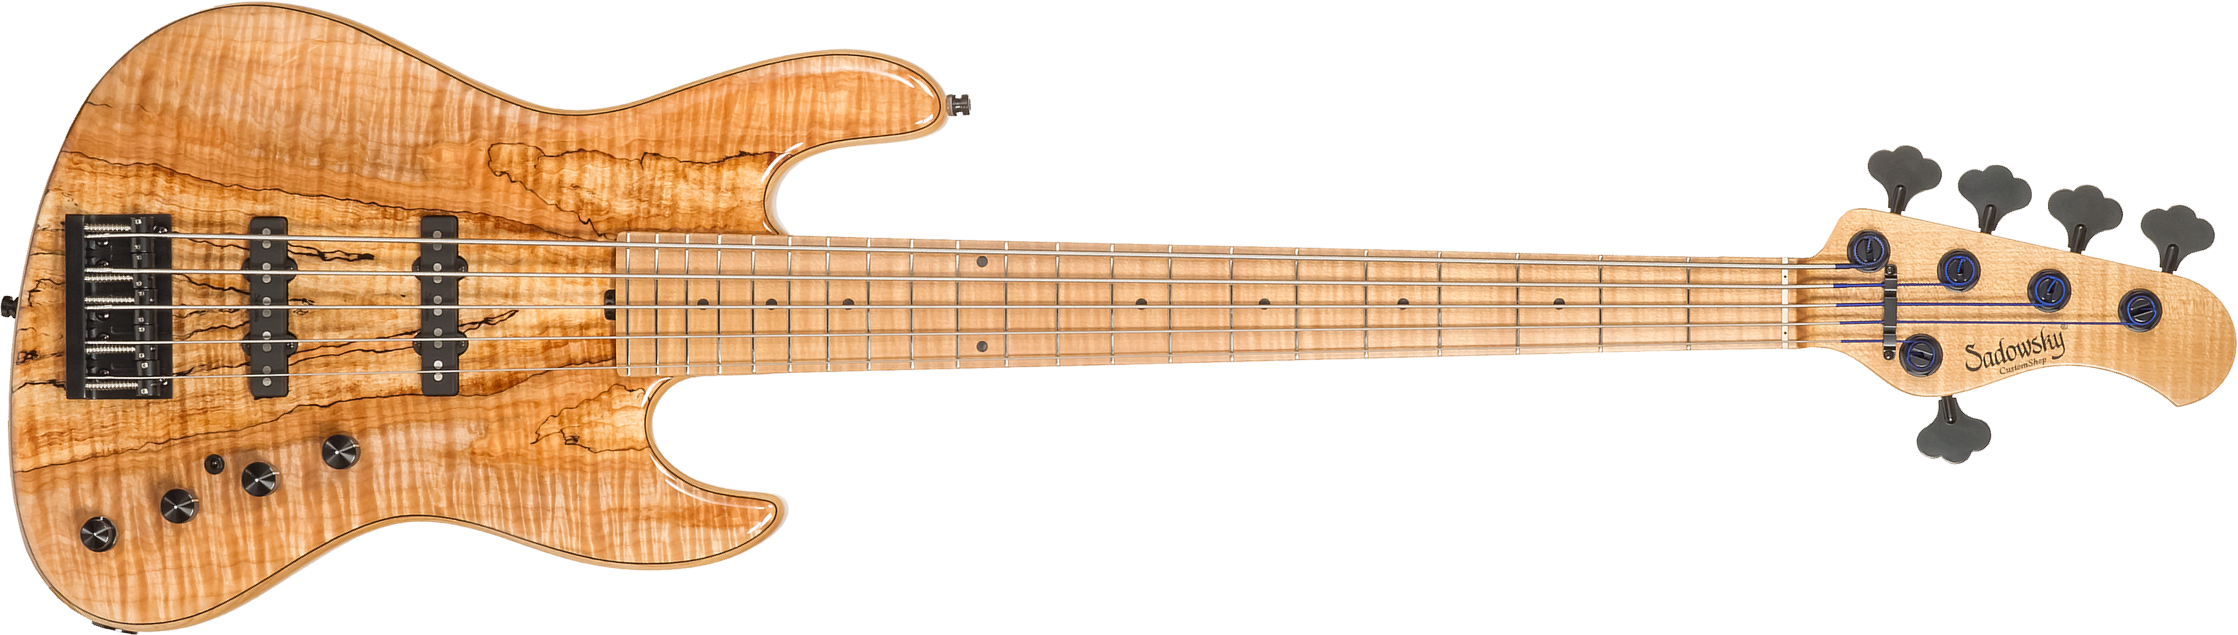 Sadowsky Custom Shop Standard J/j Bass 21f 5c Spalted Maple 5c Active Mn #scsc000188-23 - Natural - Solid body electric bass - Main picture